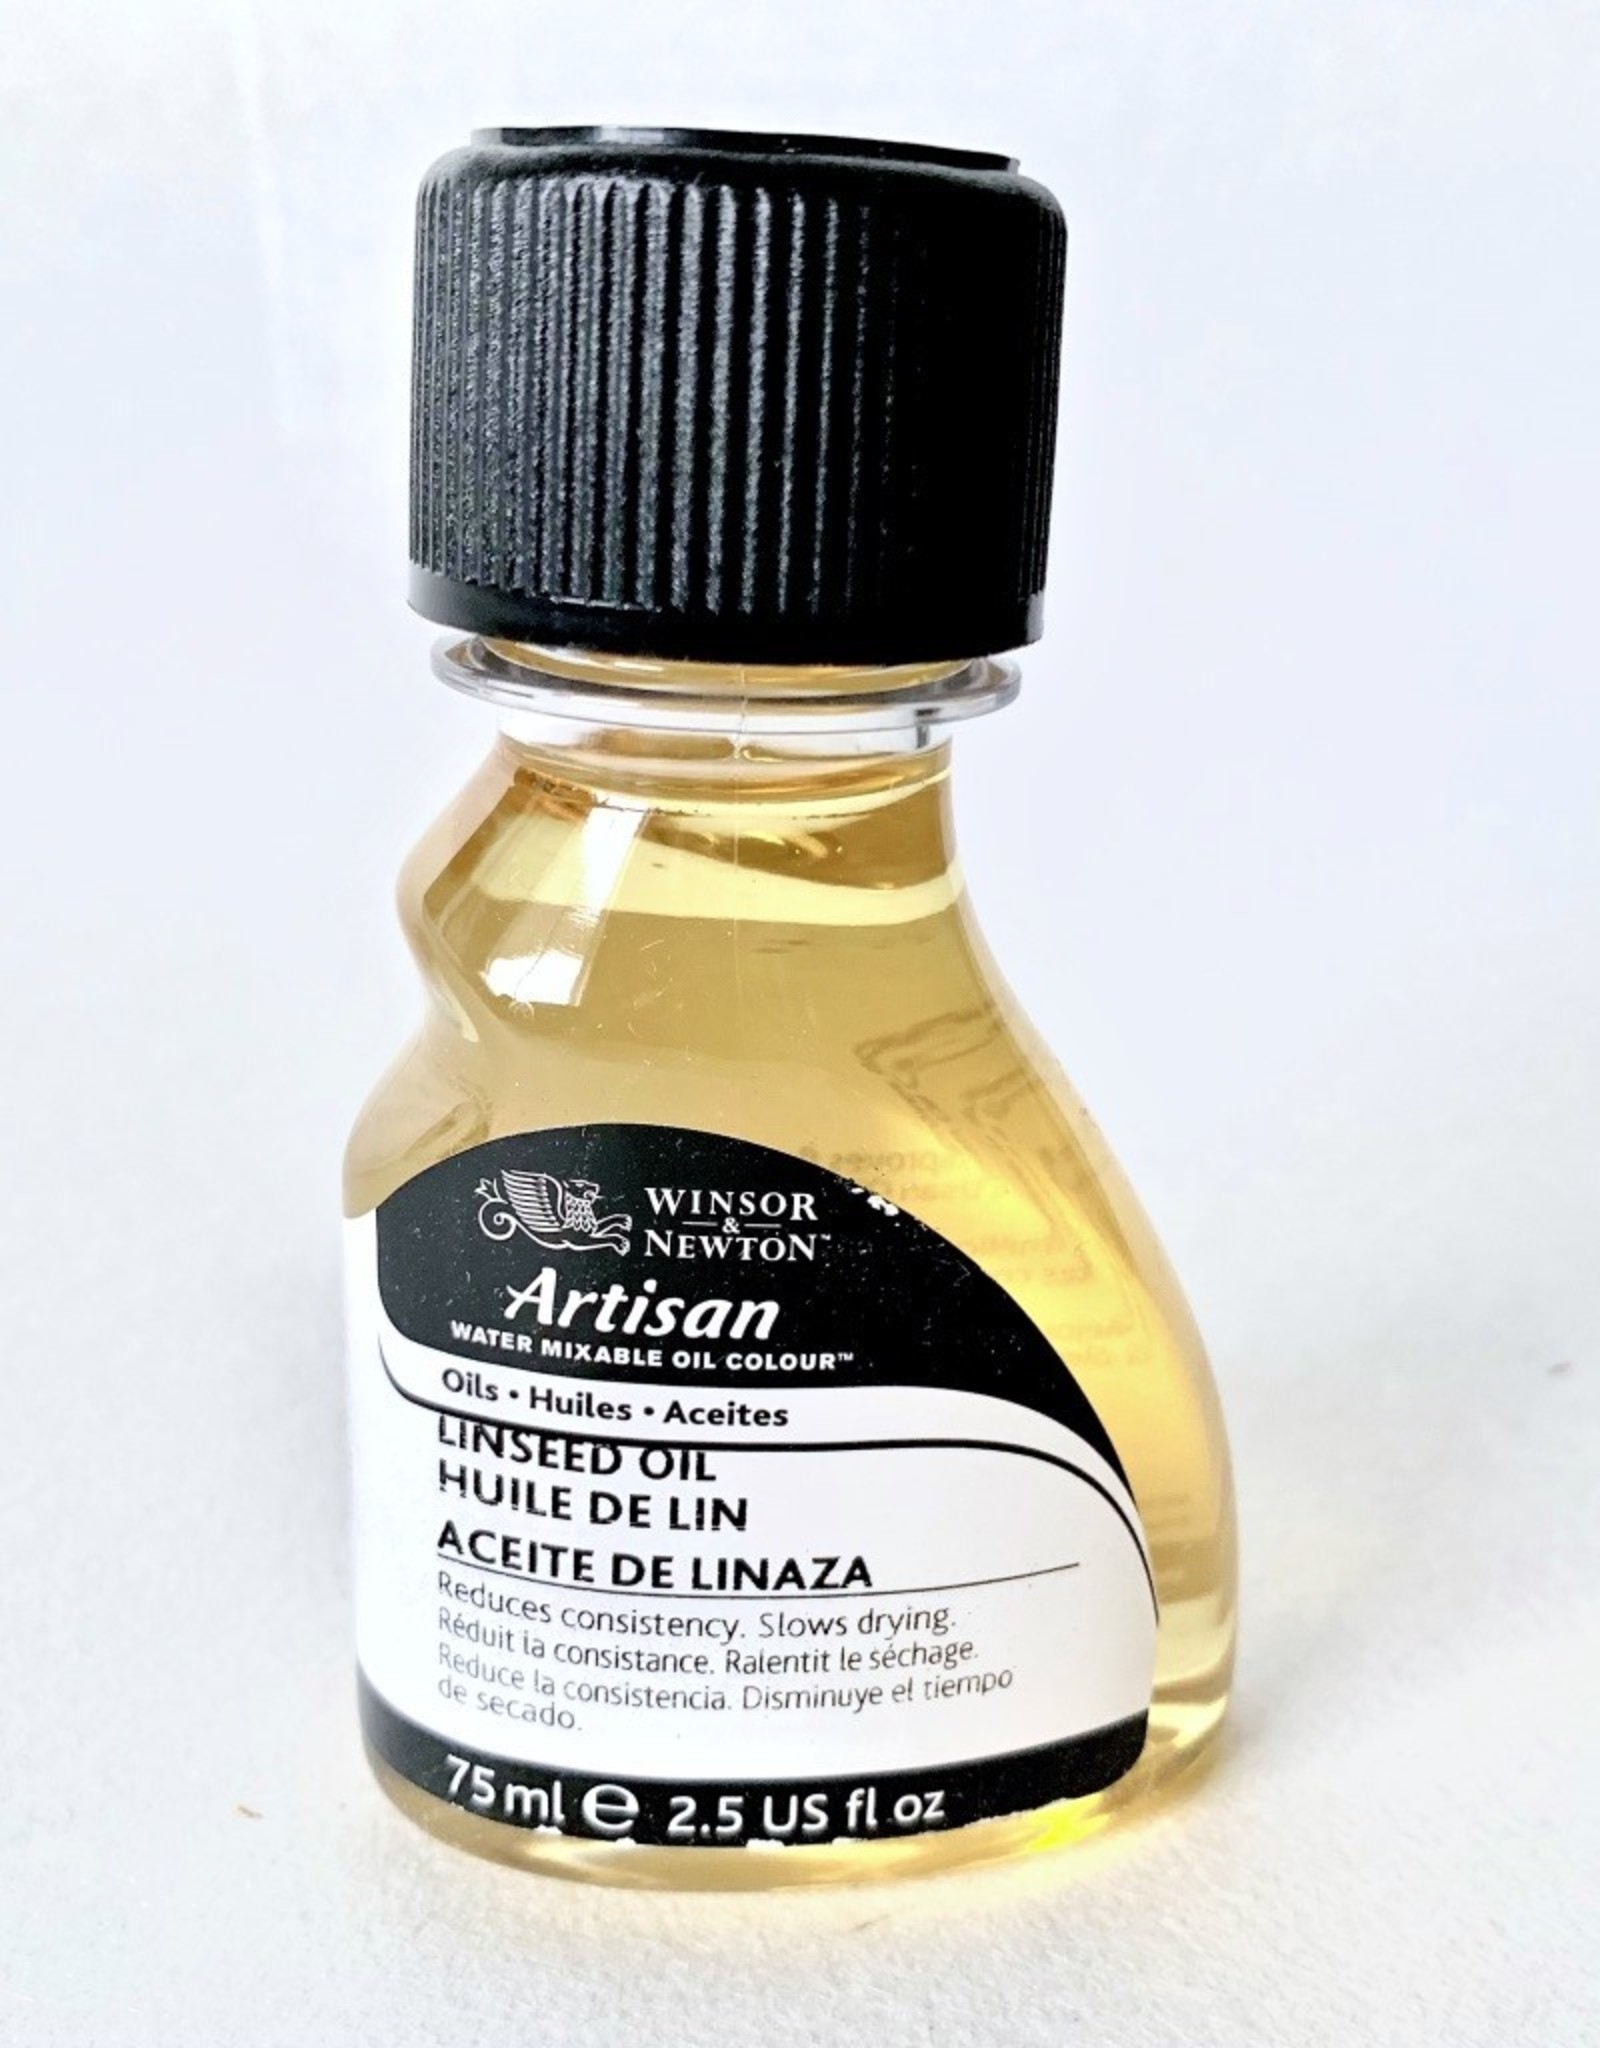 Winsor & Newton Artisan Water Mixable Oil, Linseed Oil 75ml